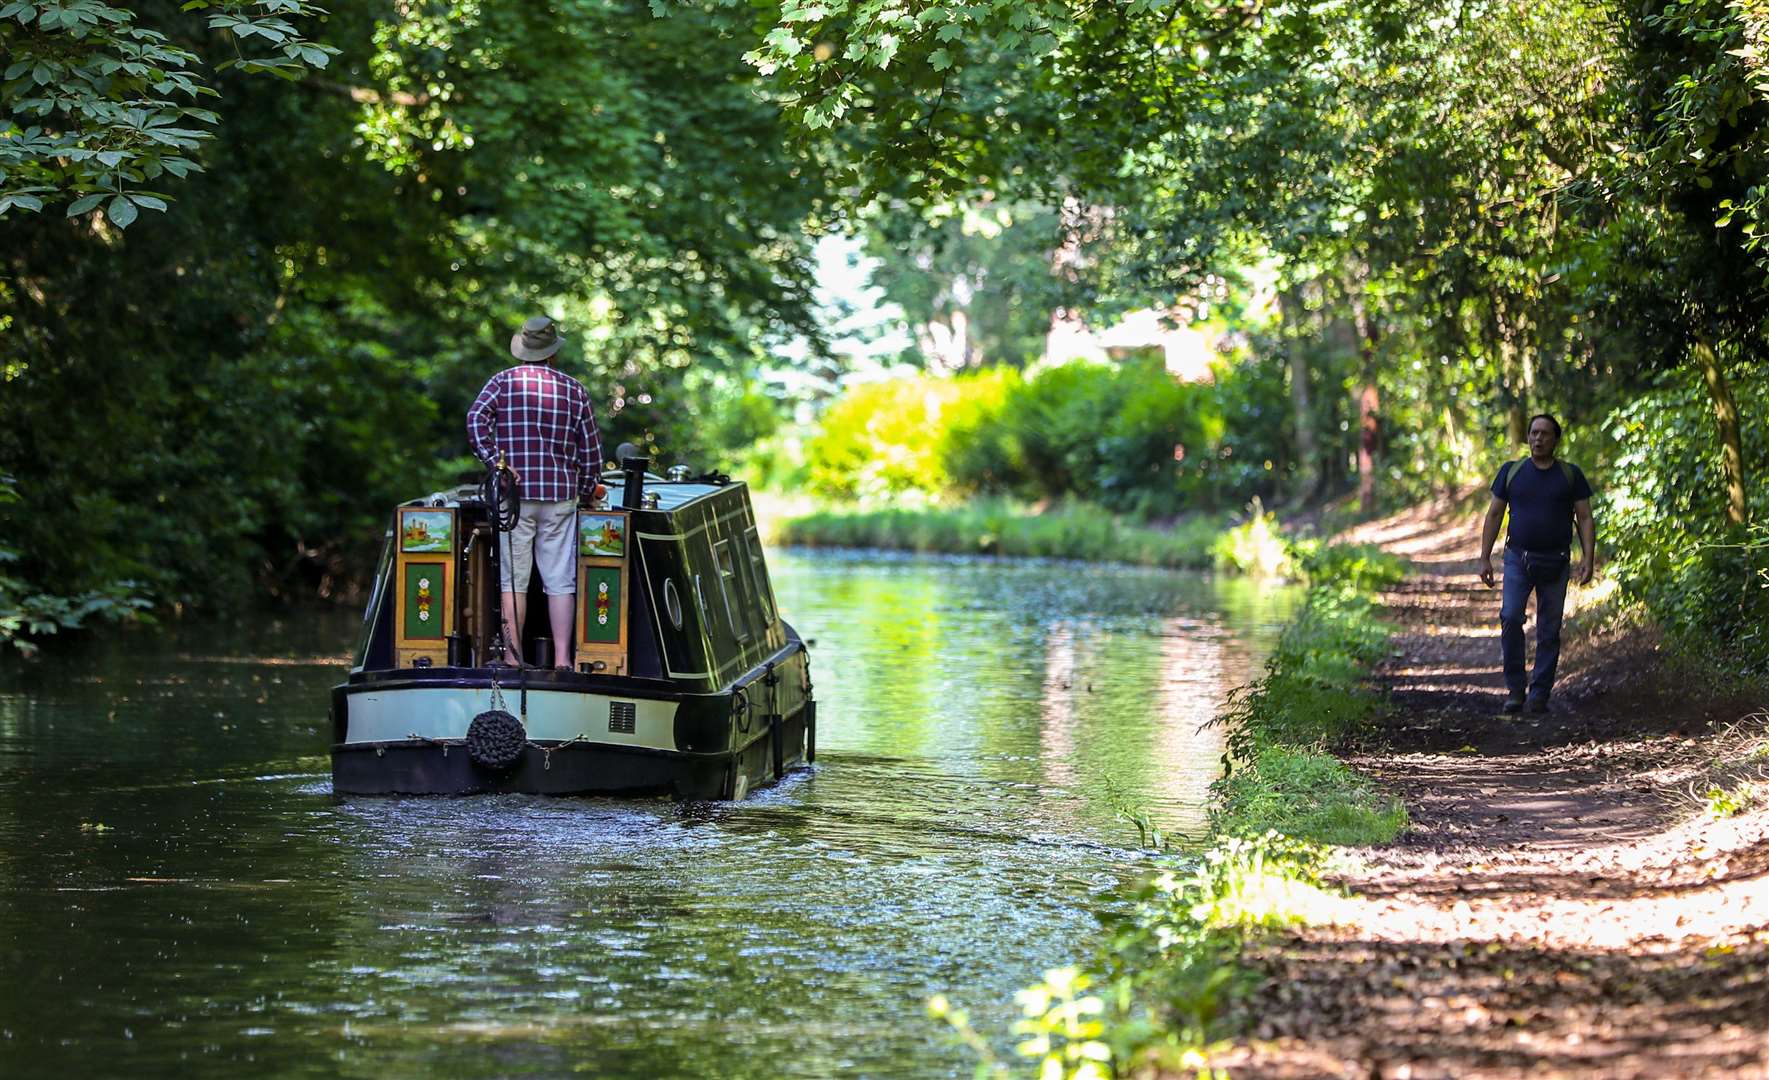 Things were rather more sedate in Cheshire, as a boat meandered along the Bridgewater Canal in Walton Hall (Peter Byrne/PA)